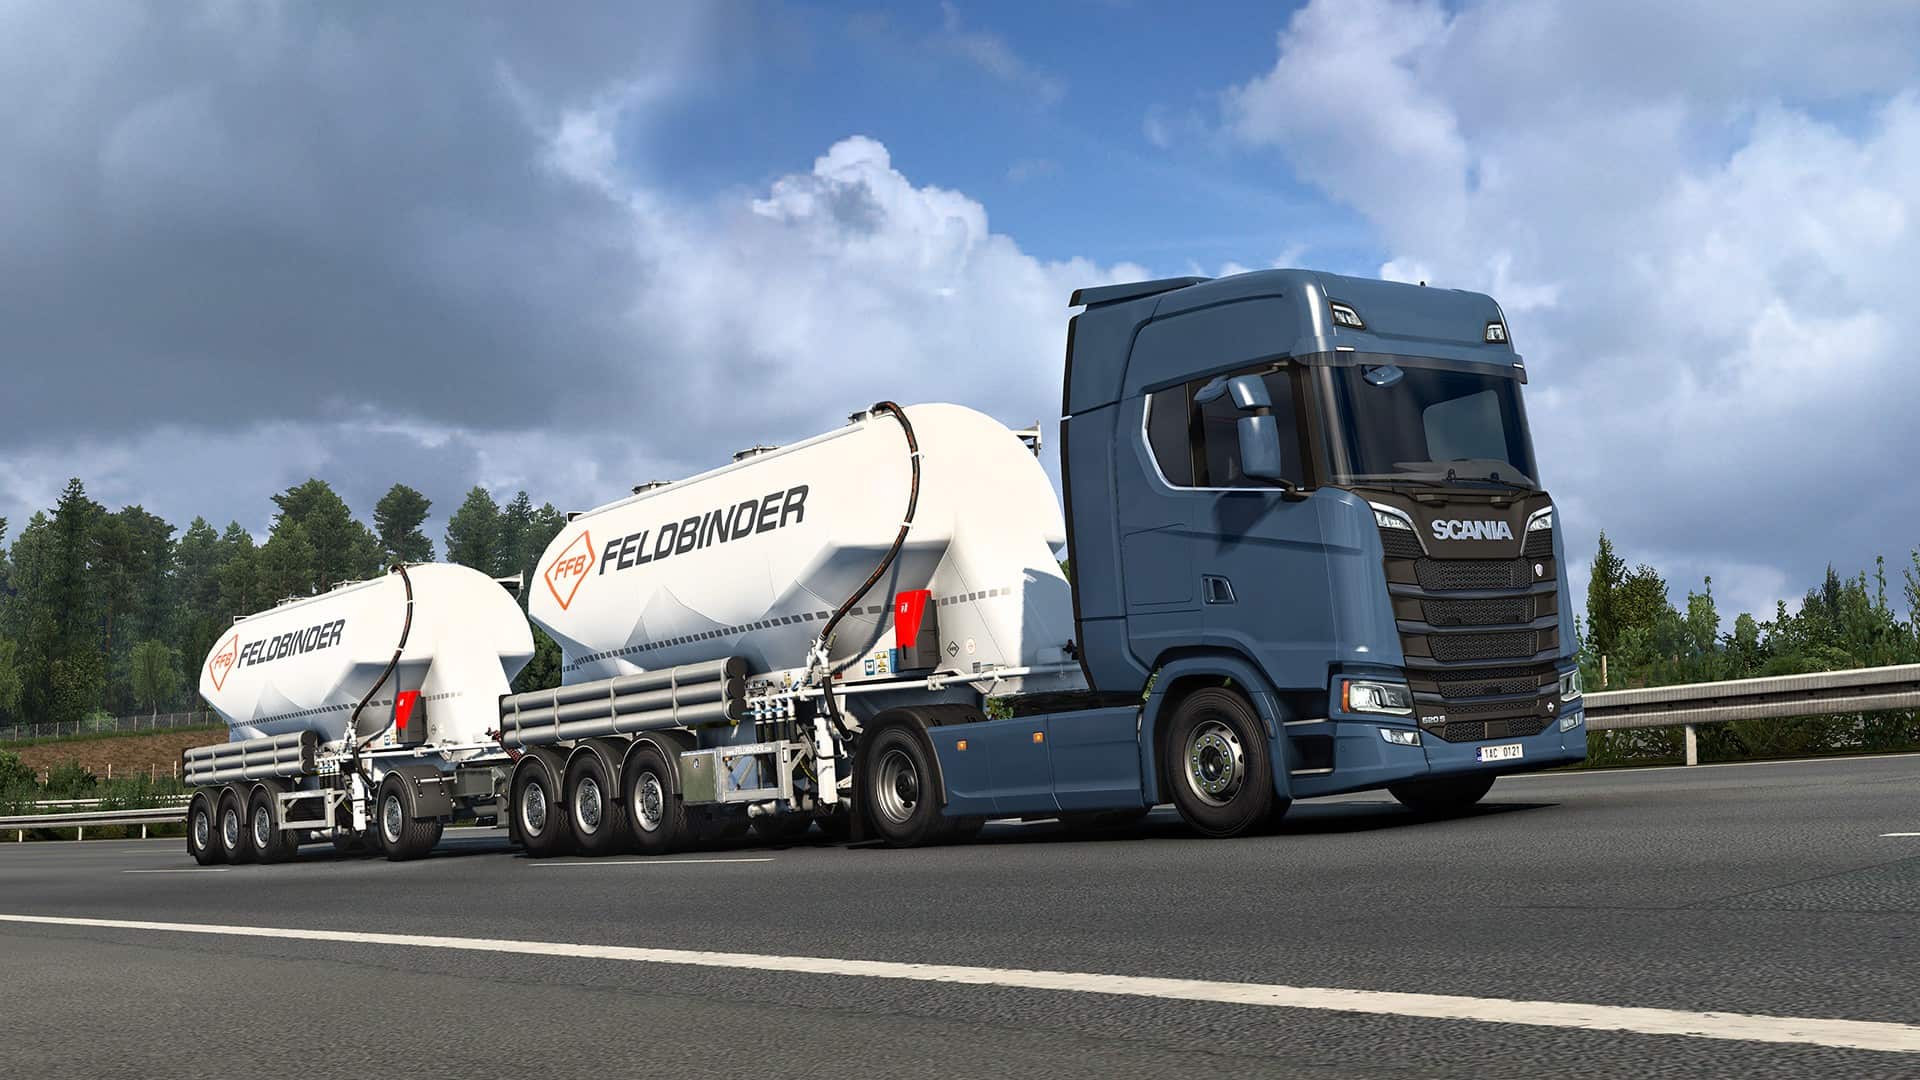 Euro Truck Simulator 2 partners with iconic Feldbinder brand in latest DLC  | Traxion.GG